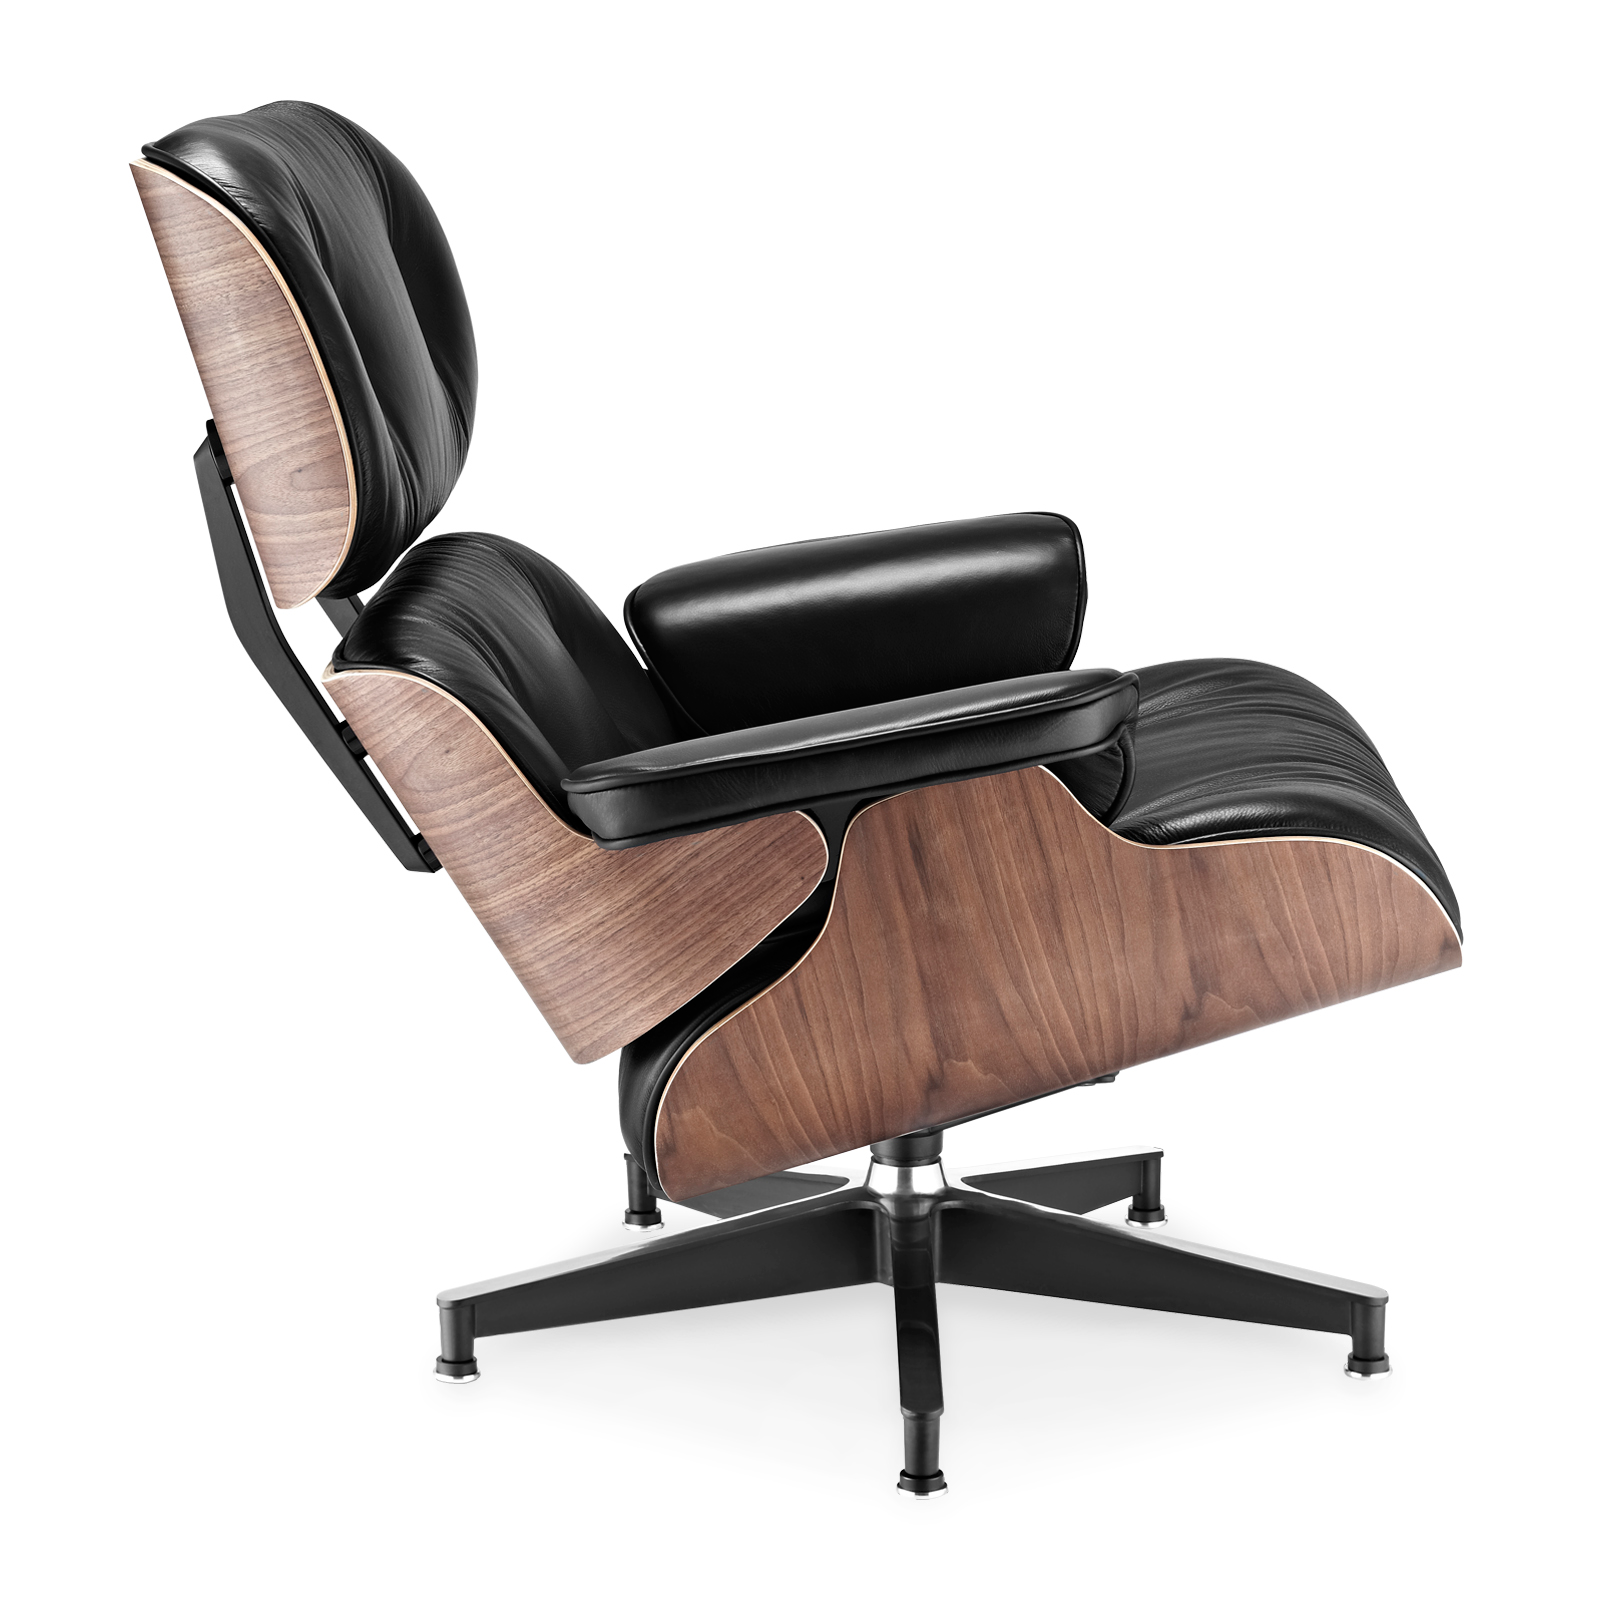 Relax in Charles Eames inspired luxurious yet comfortable Eames Lounge chair